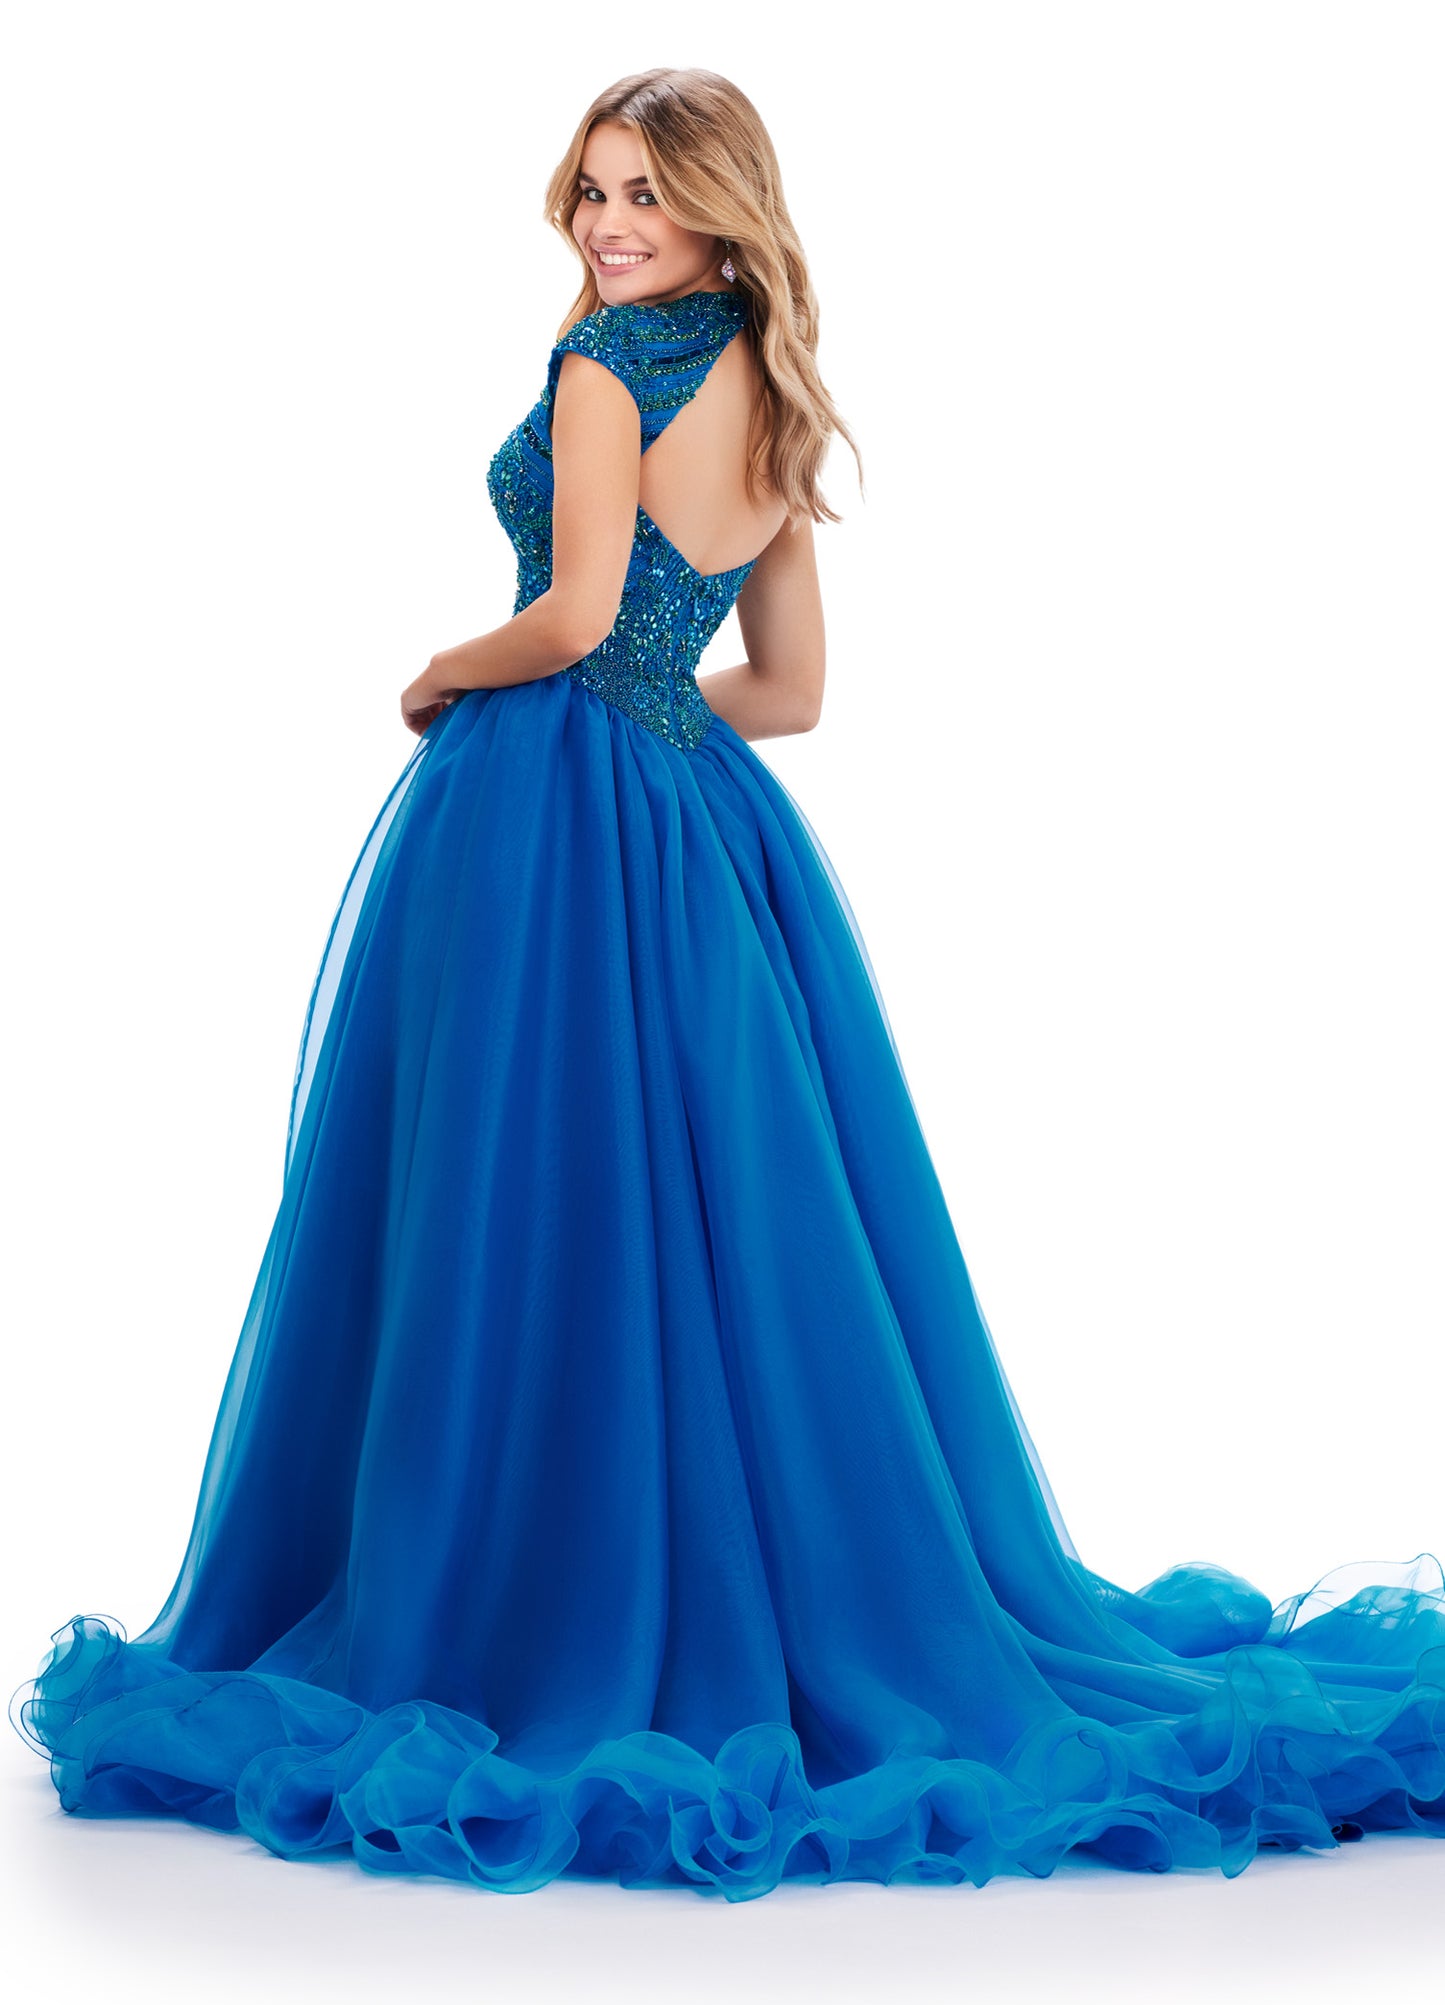 The Ashley Lauren 11548 is a stunning long prom dress made of organza. The ball gown silhouette, cap sleeves, and beaded bustier add elegance to any formal occasion. Perfect for pageants, this dress is sure to make a statement. This fully beaded high neck bustier ball gown is complimented with an organza skirt. The open back and cap sleeves complete the look.